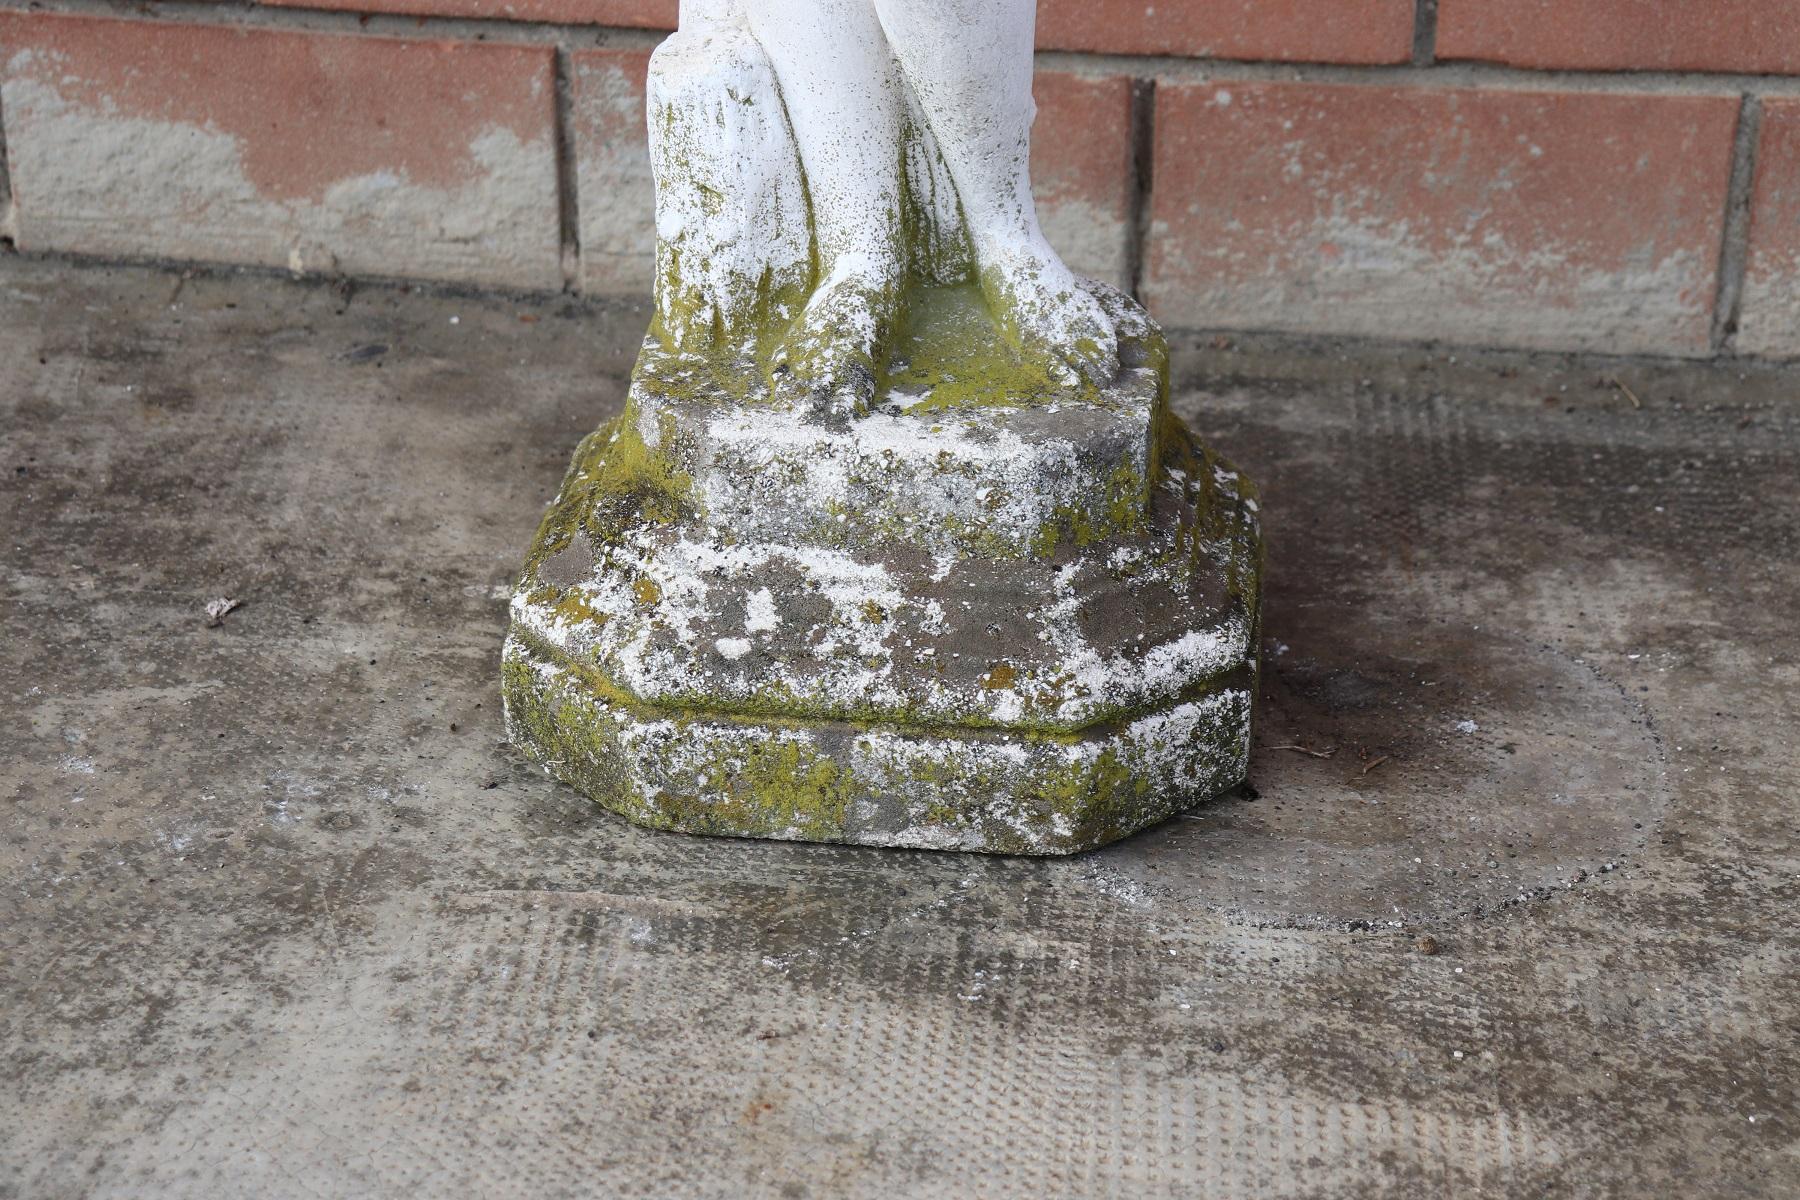 Beautiful refined garden statue in neoclassical style, circa 1930s main material stone mixed with gravel and cement. Beautiful and majestic statue. The stone shows signs of the passage of time. This statue is perfect for embellishing an important